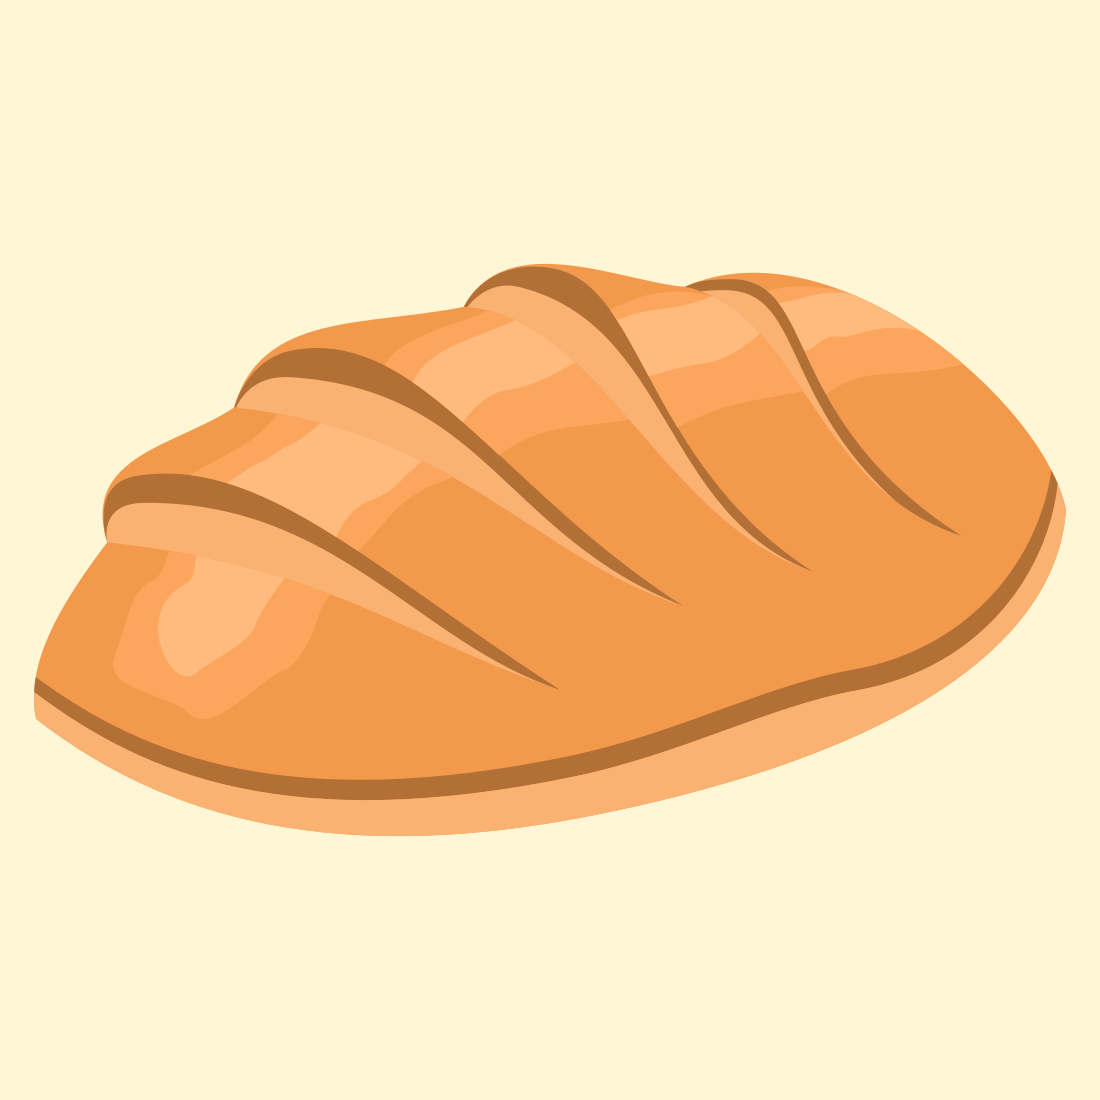 Simple BreadVector Graphic Illustration preview image.